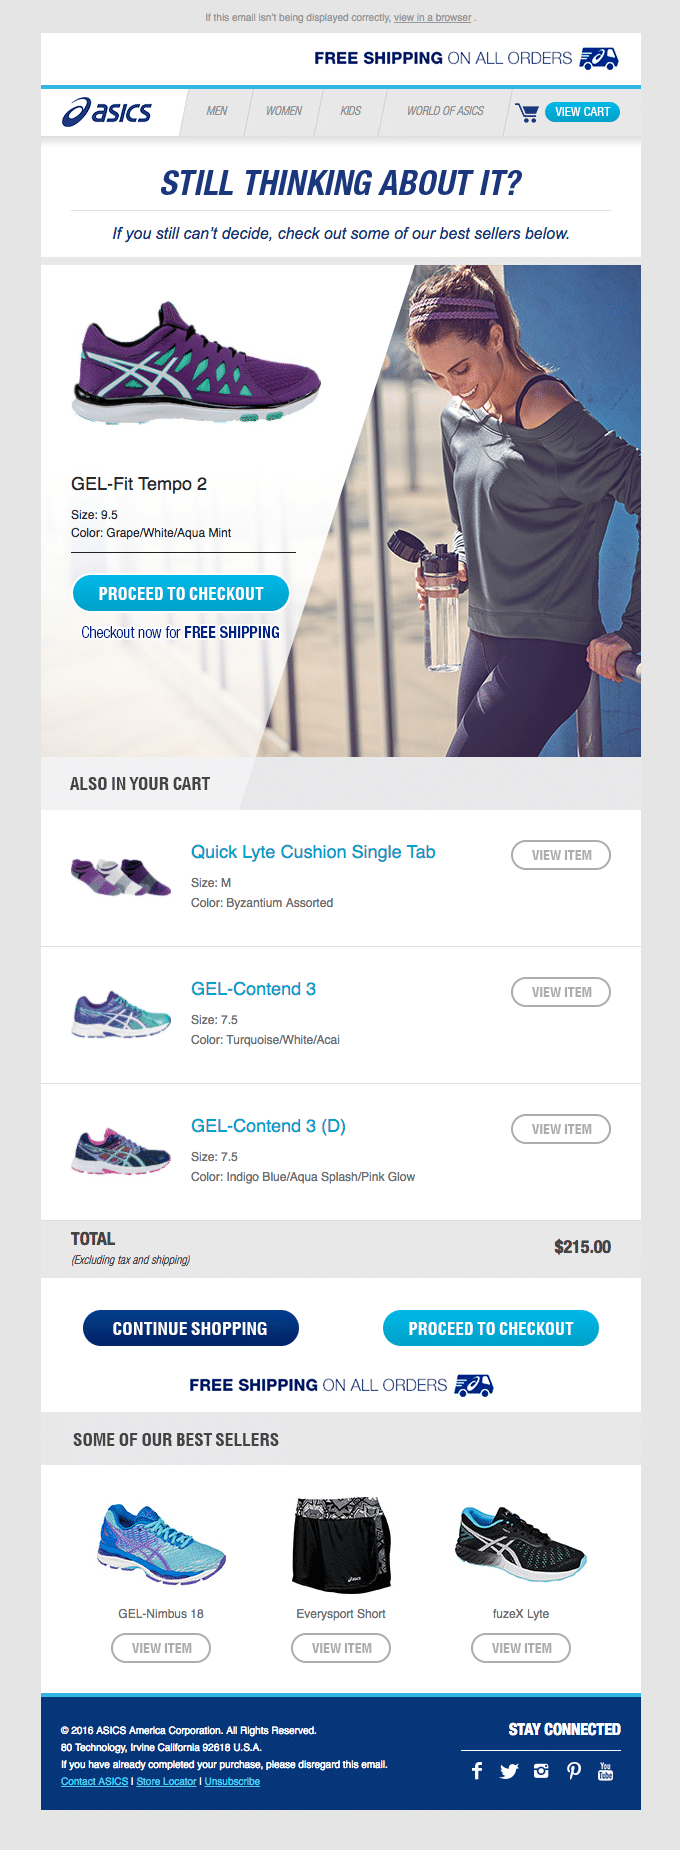  Asics email showing an example of upselling